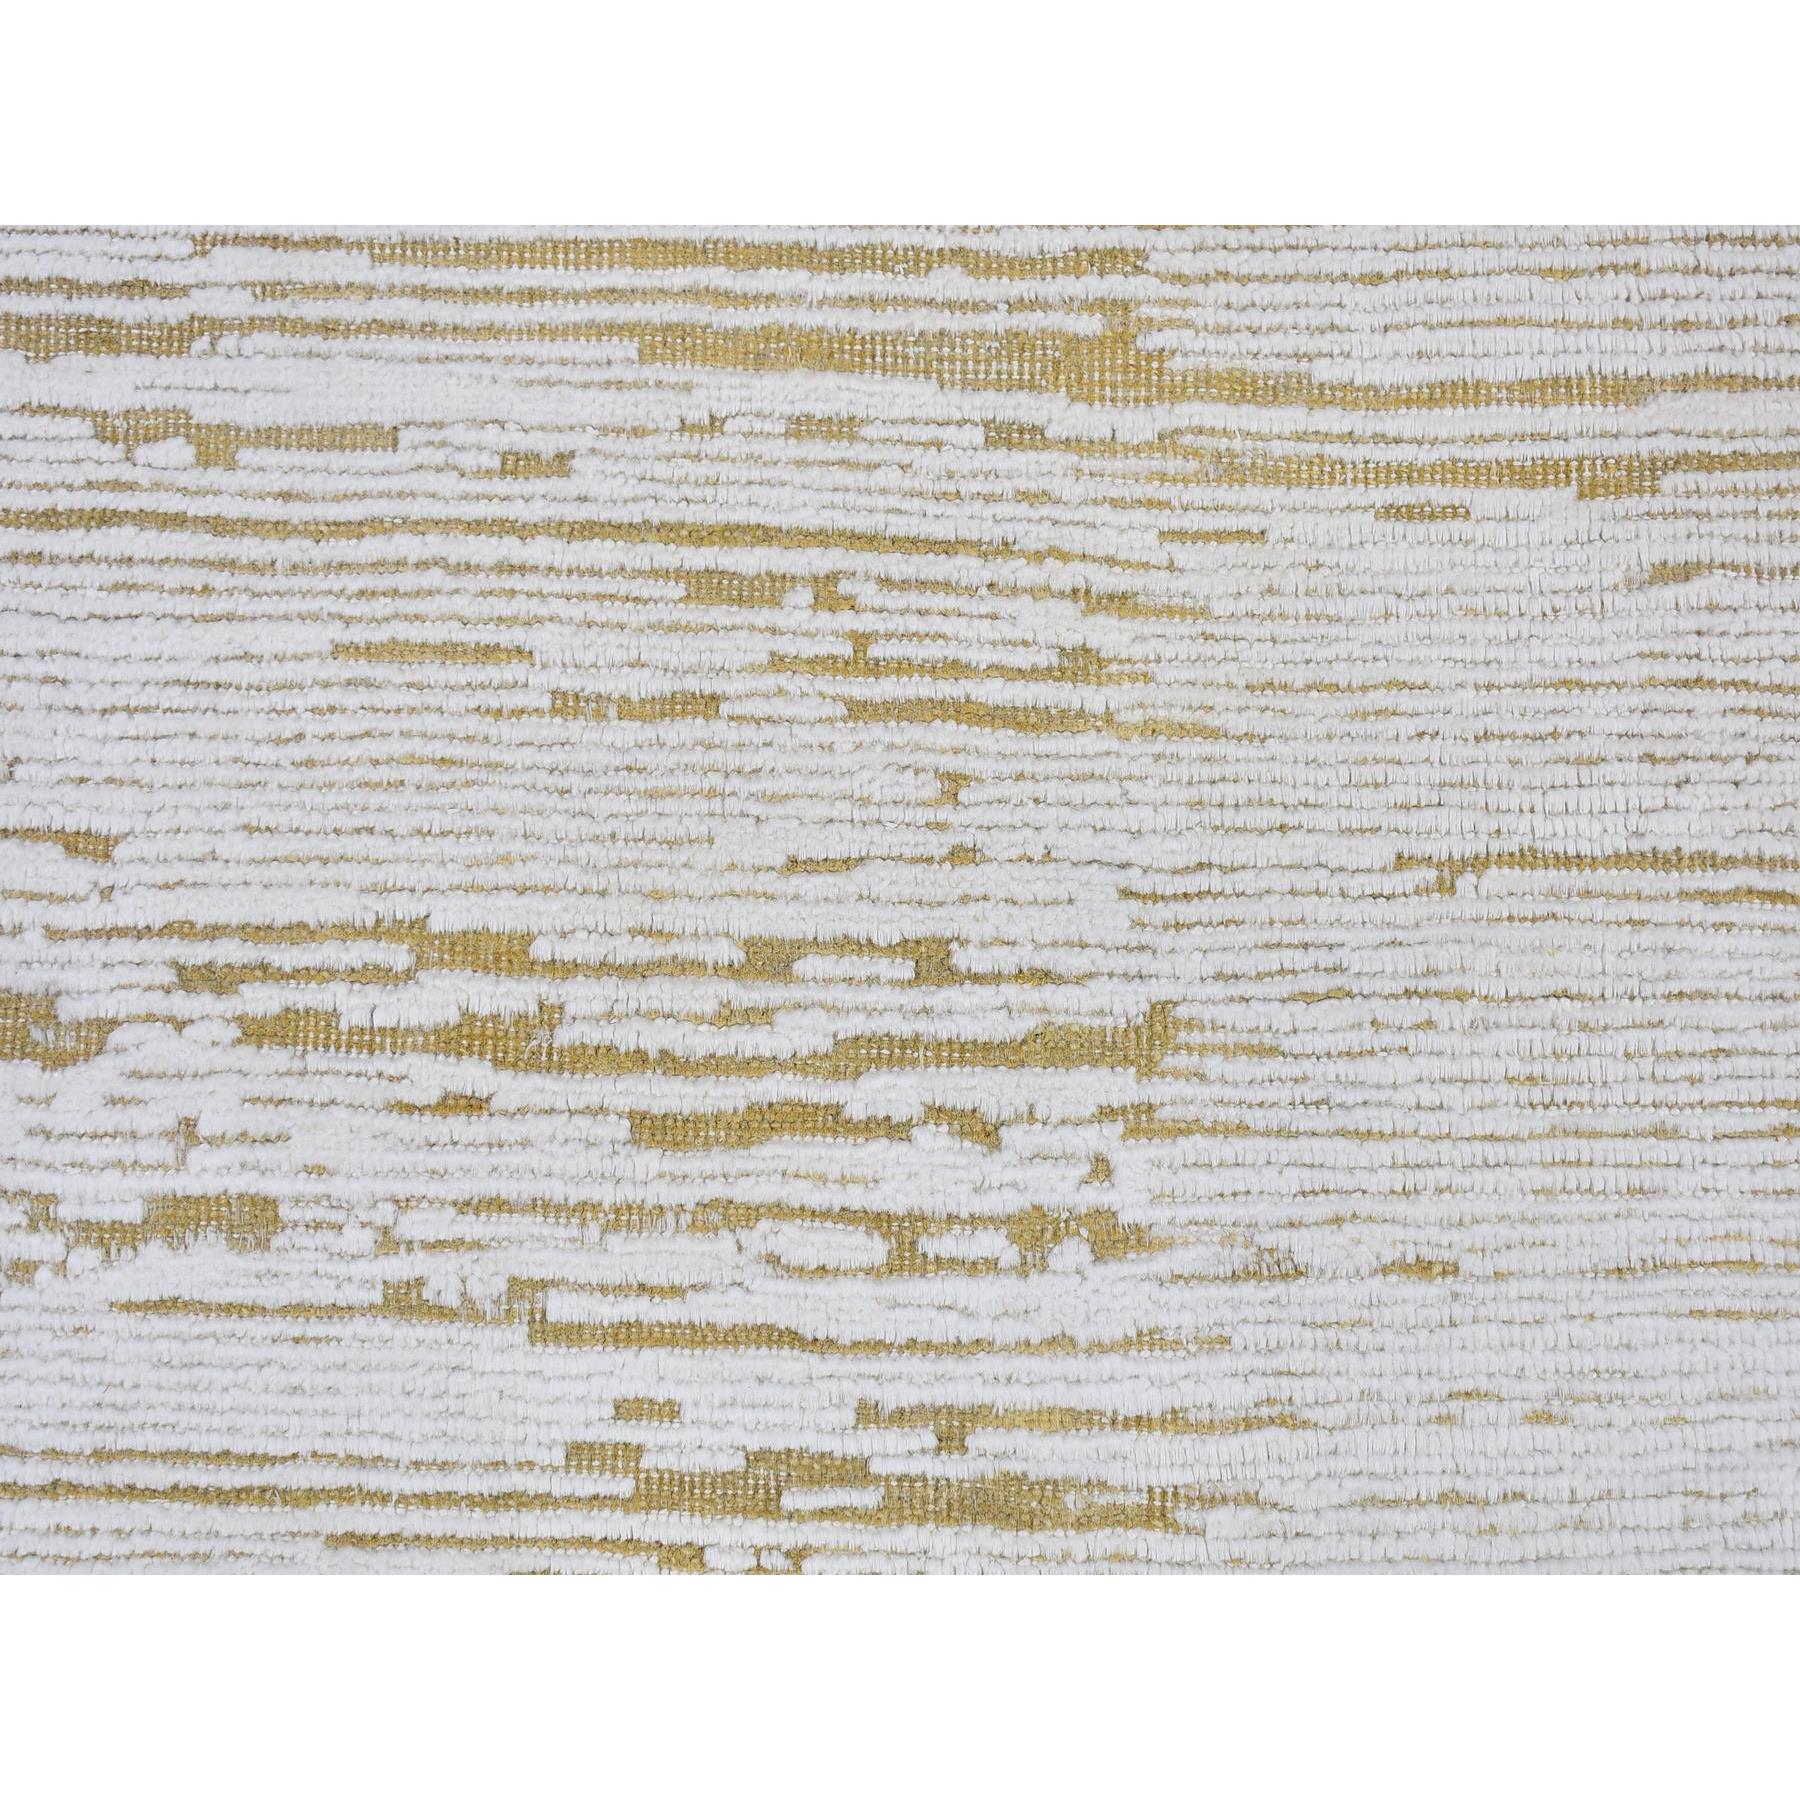 10'x14'2" Ivory Silk with Textured Wool Tone on Tone Gabbeh Design Hand Woven Hi-Low Pile Oriental Rug 